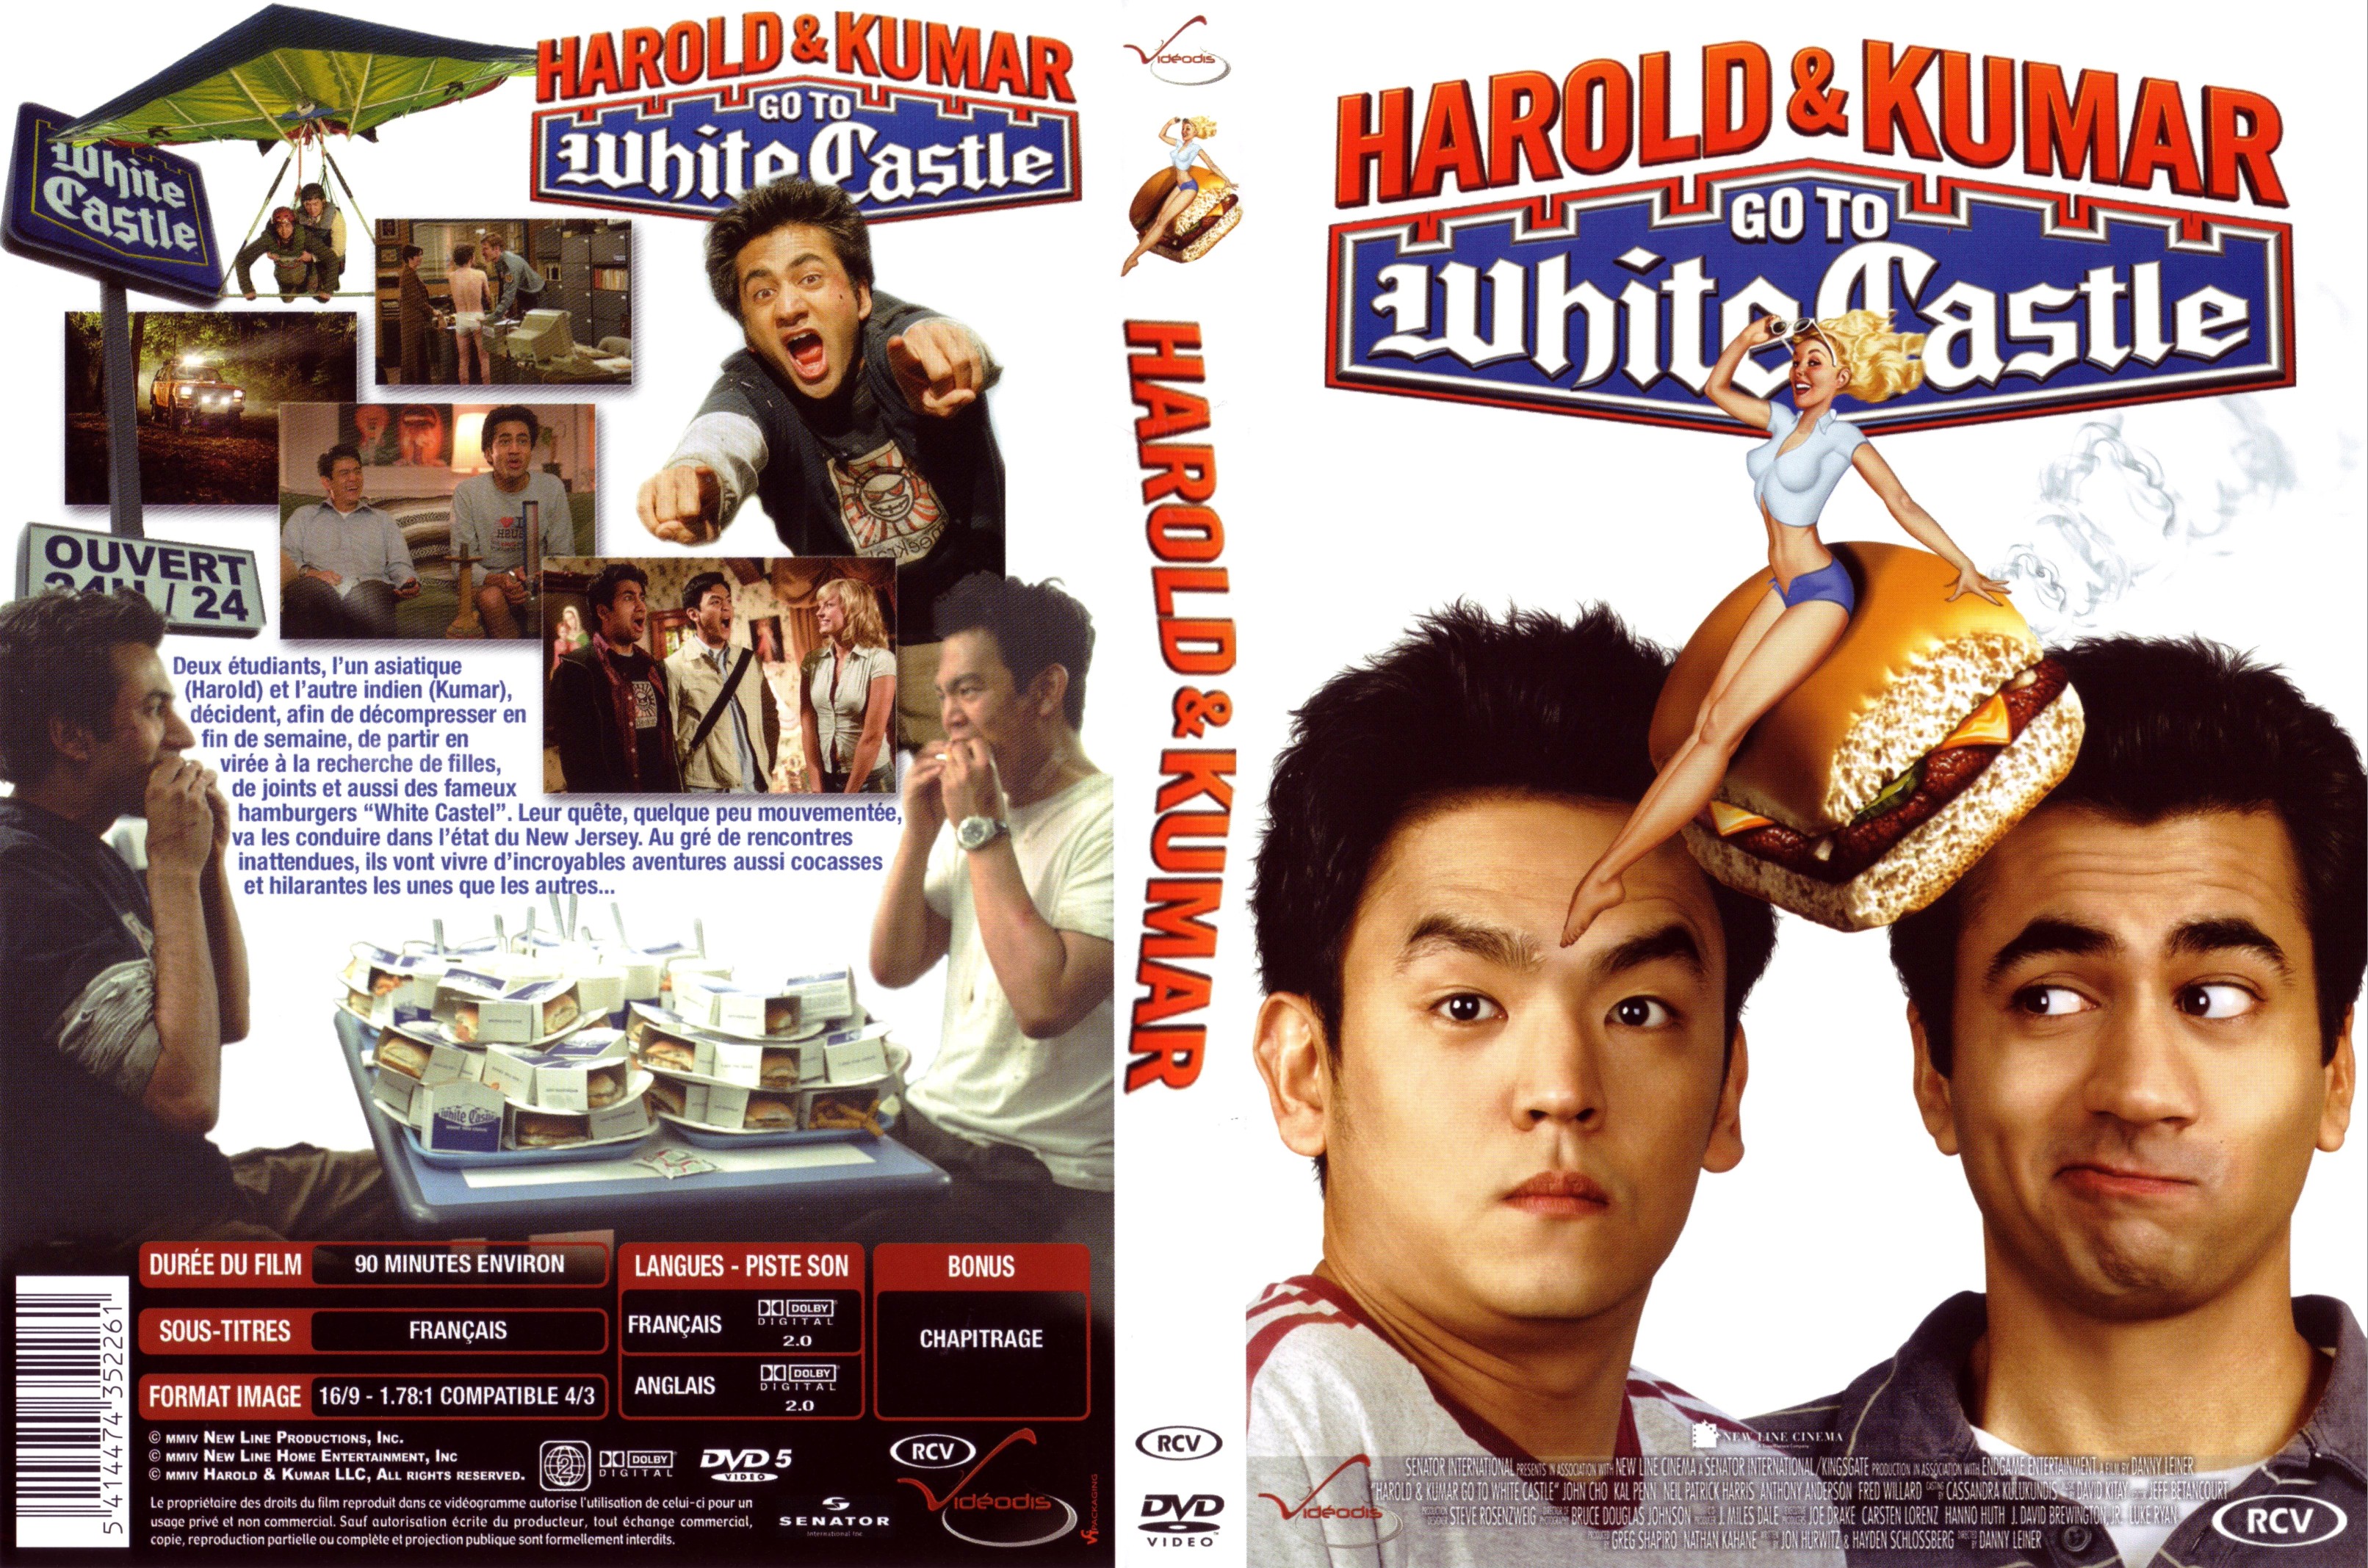 Jaquette DVD Harold and Kumar go to the White Castle